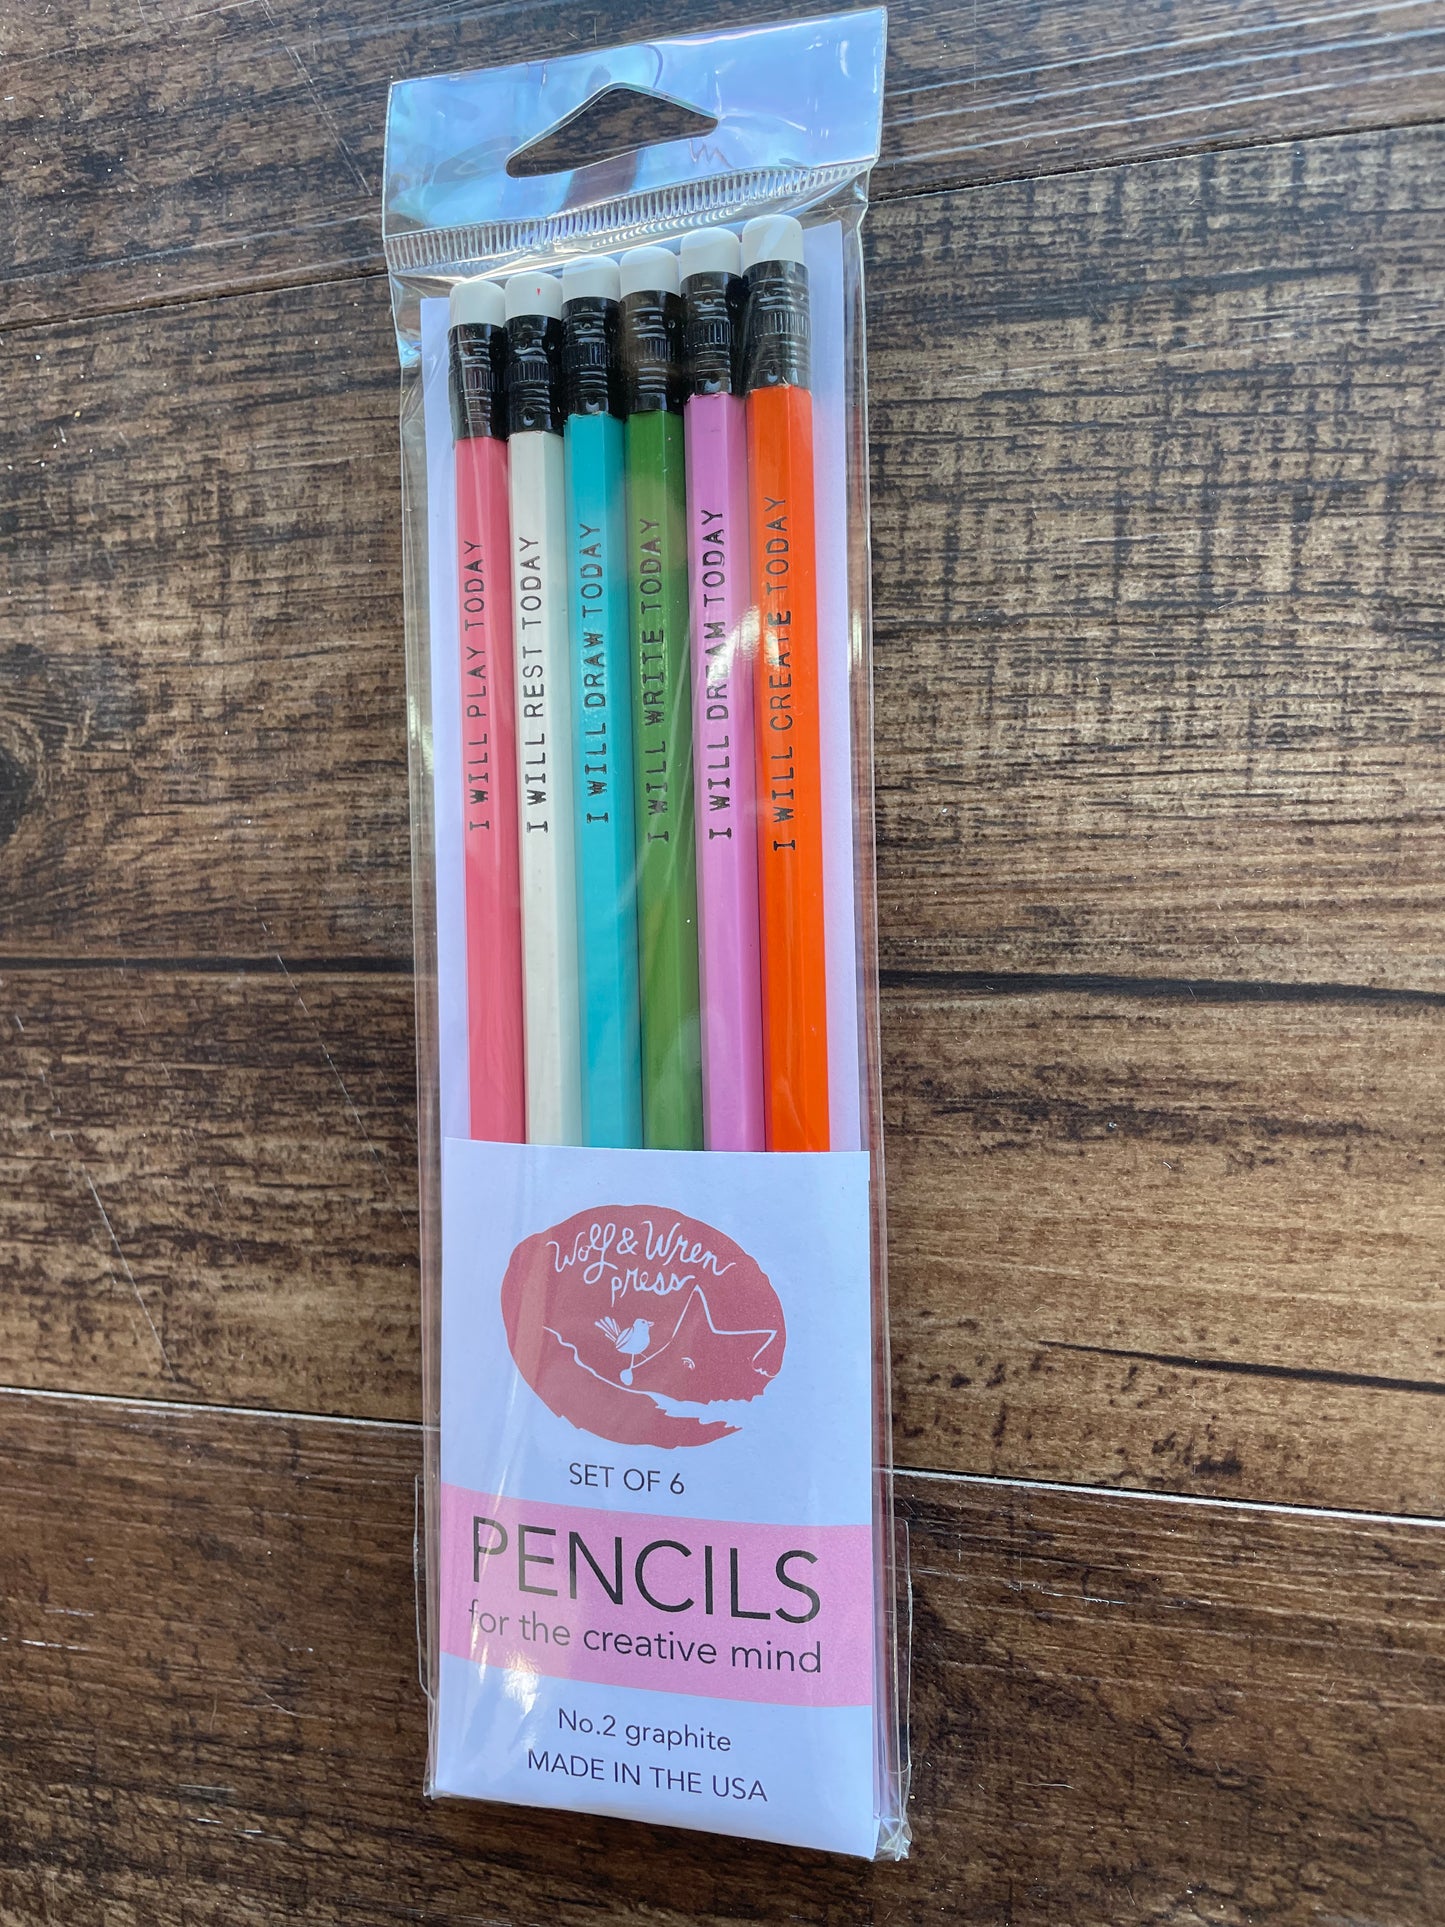 Pencils for the Creative Mind, set of 6